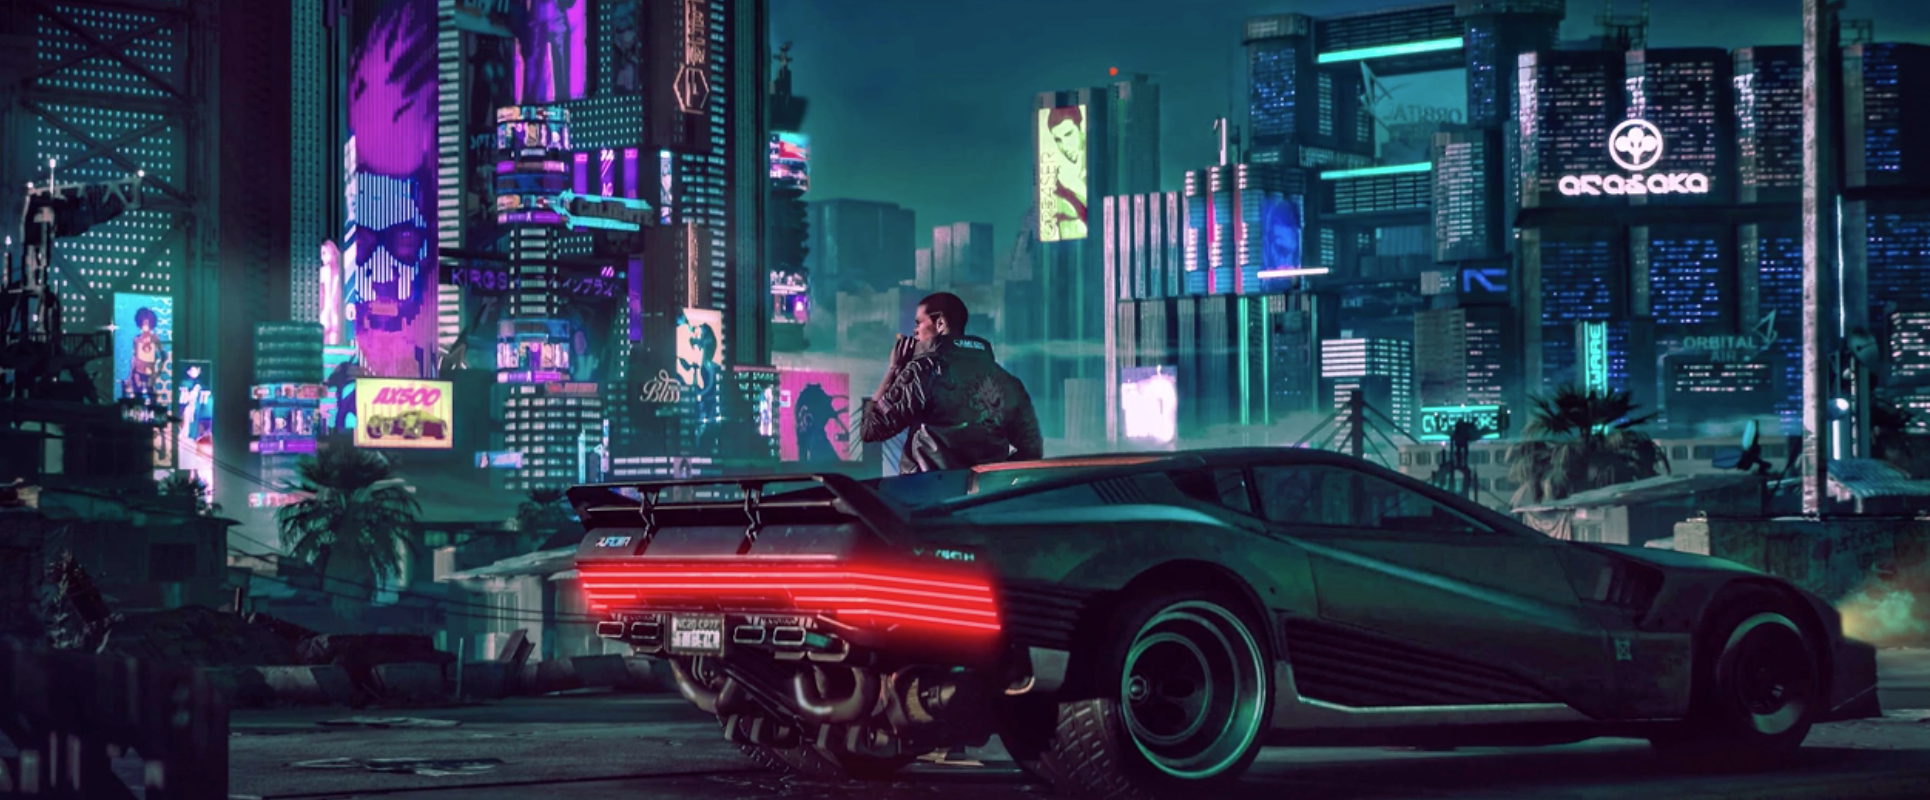 Free download Cyberpunk 2077 Fan Made Living Wallpaper Turns Your Desktop Into [1930x800] for your Desktop, Mobile & Tablet. Explore Living Wallpaper. Free Wallpaper Background For Laptops, 3D Live